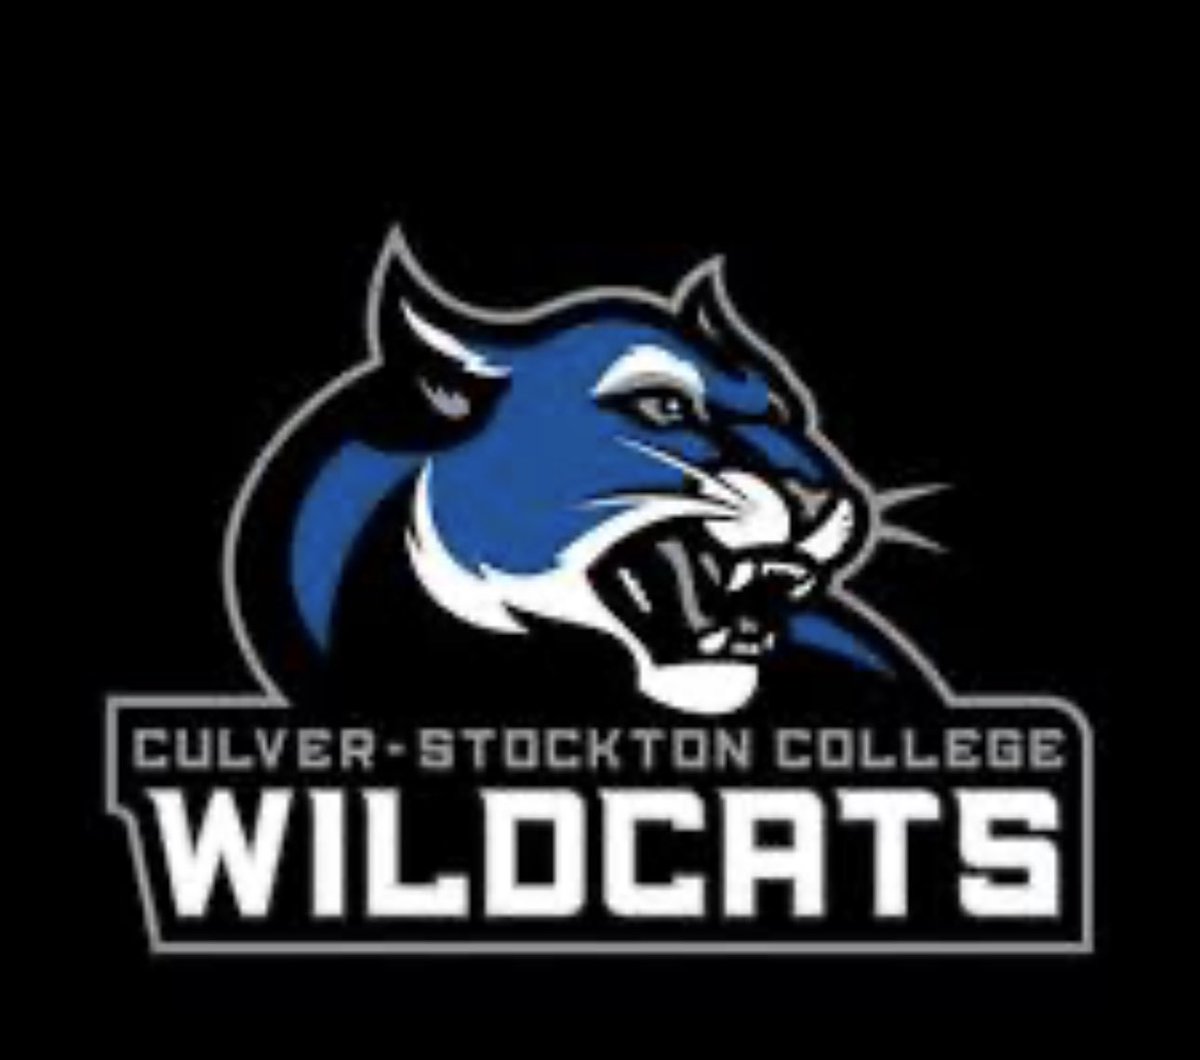 Blessed to receive a invitation to culver-Stockton college showupshowout prospect camp